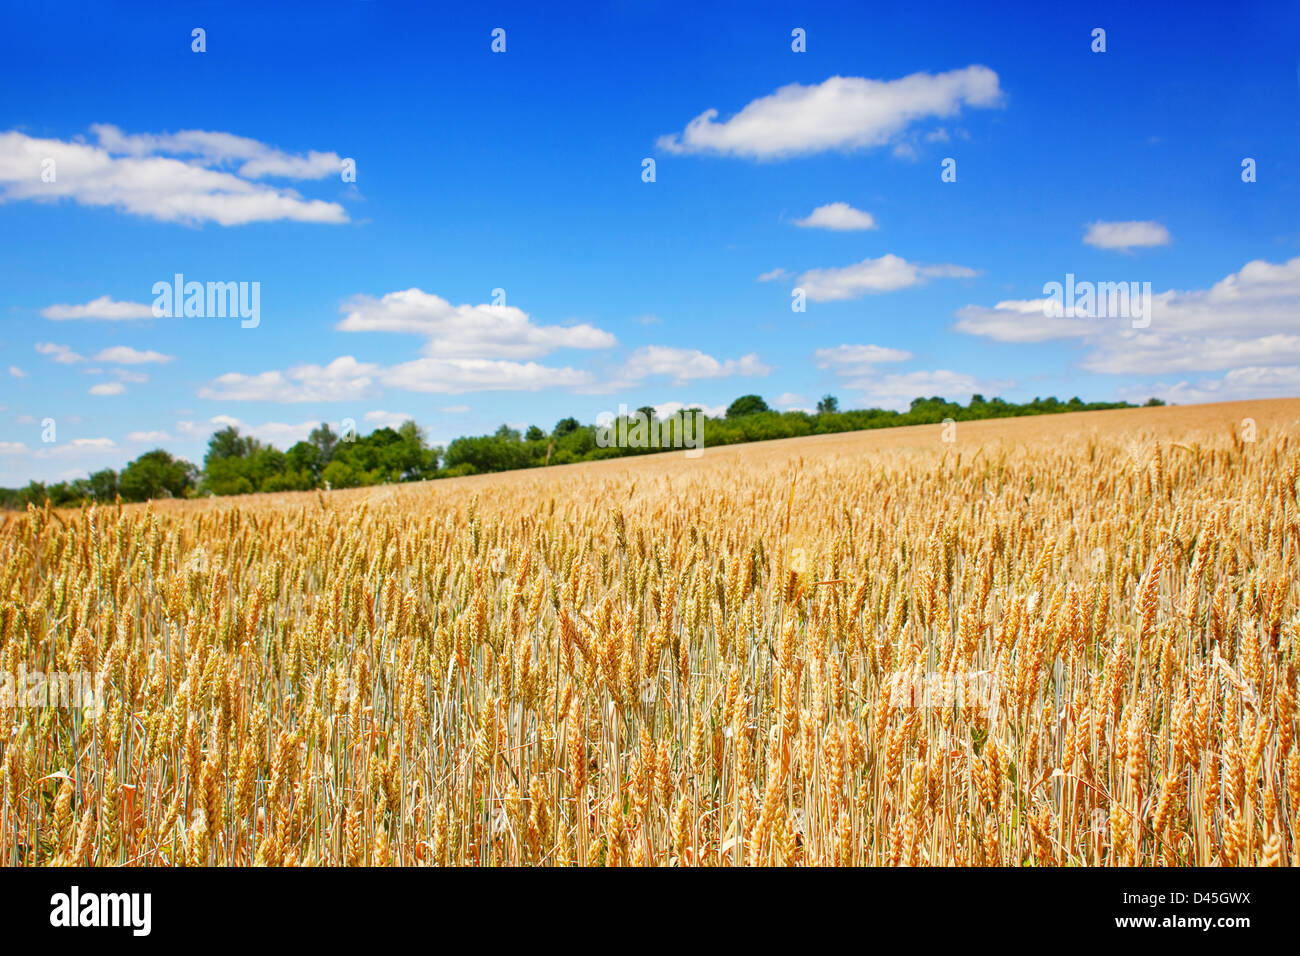 Wheat field landscape with sky Stock Photo